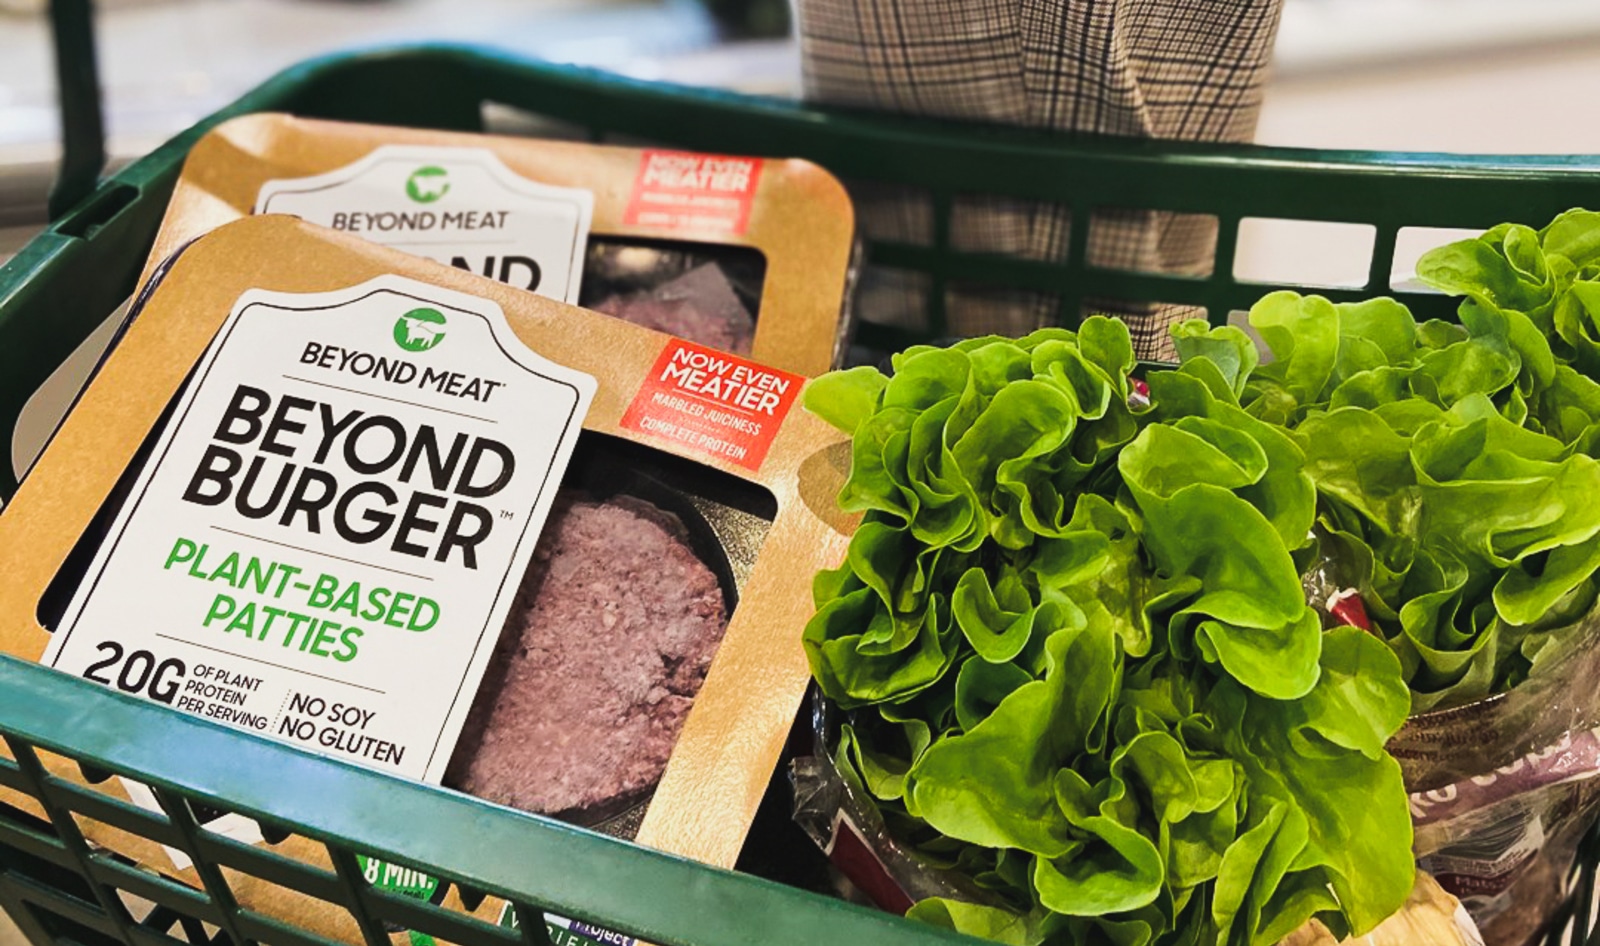 Plant-Based Food Sales Up 54 Percent to $7.4 Billion Since 2018